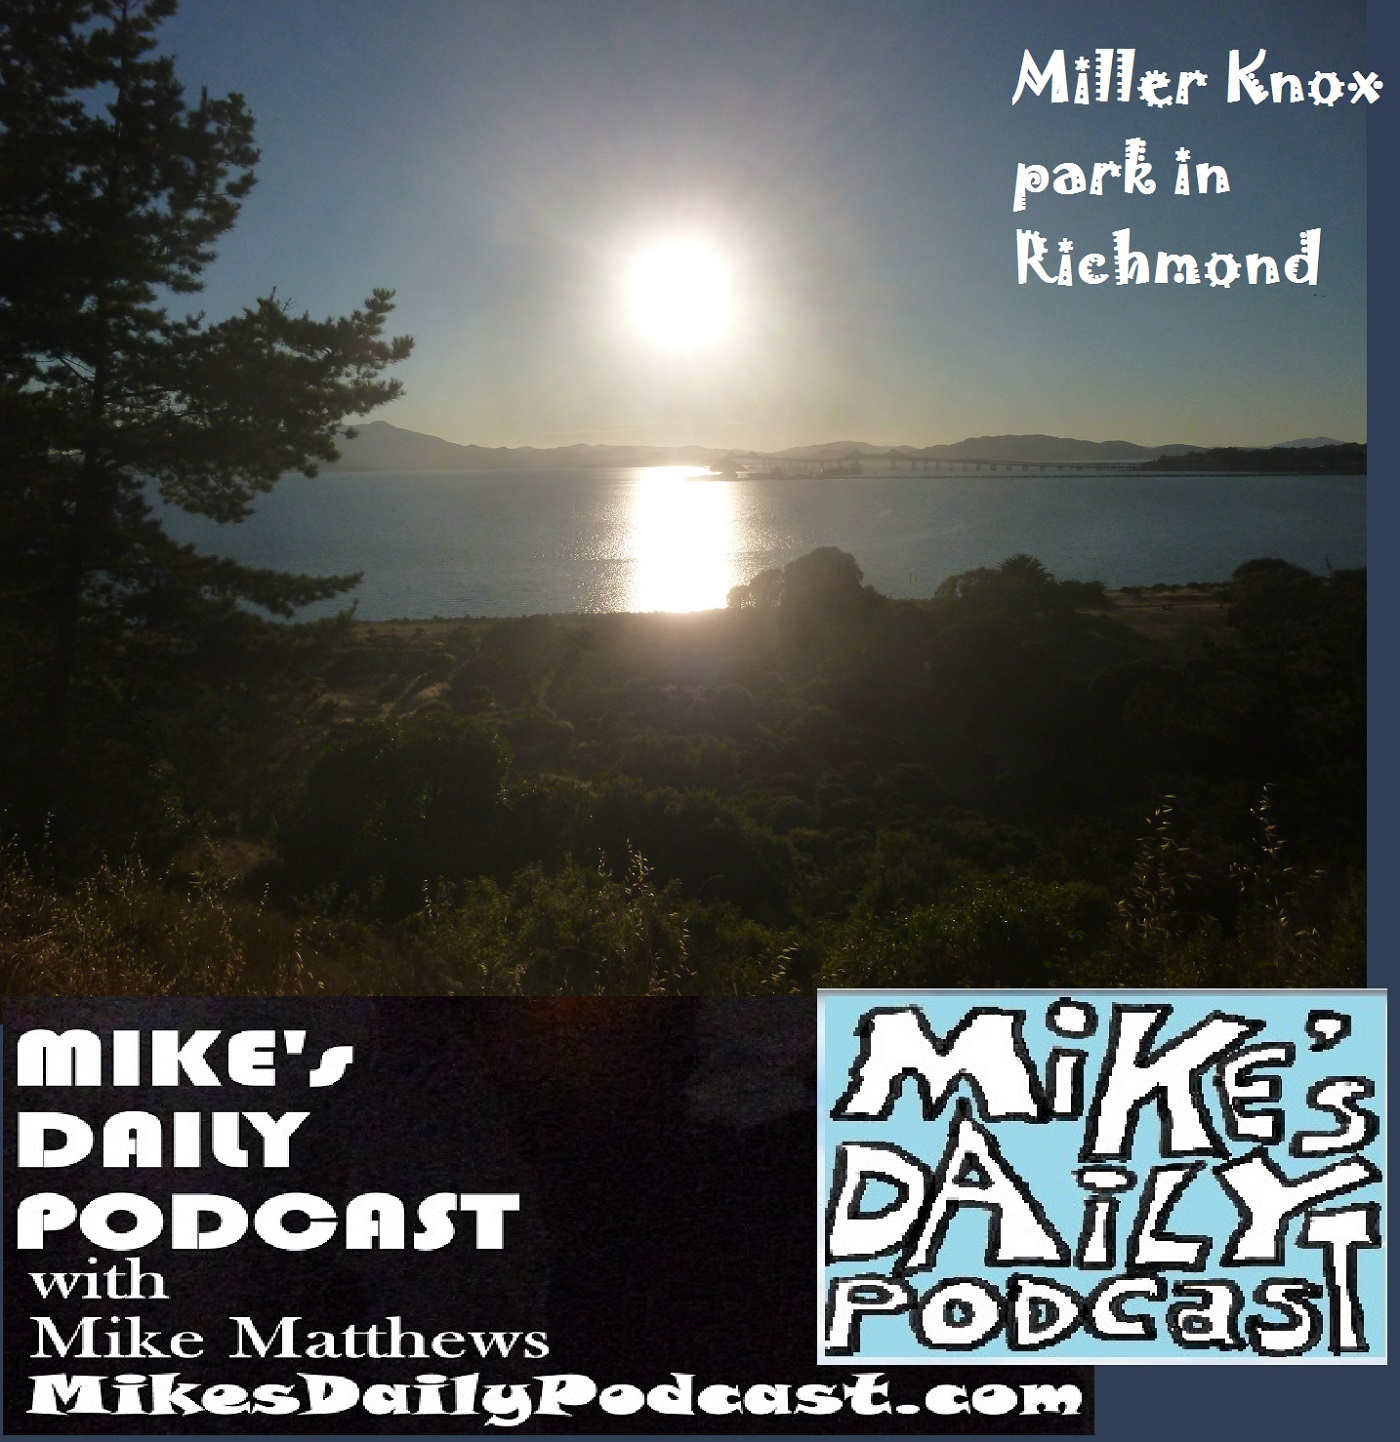 MIKEs DAILY PODCAST 1163 Miller Knox Richmond